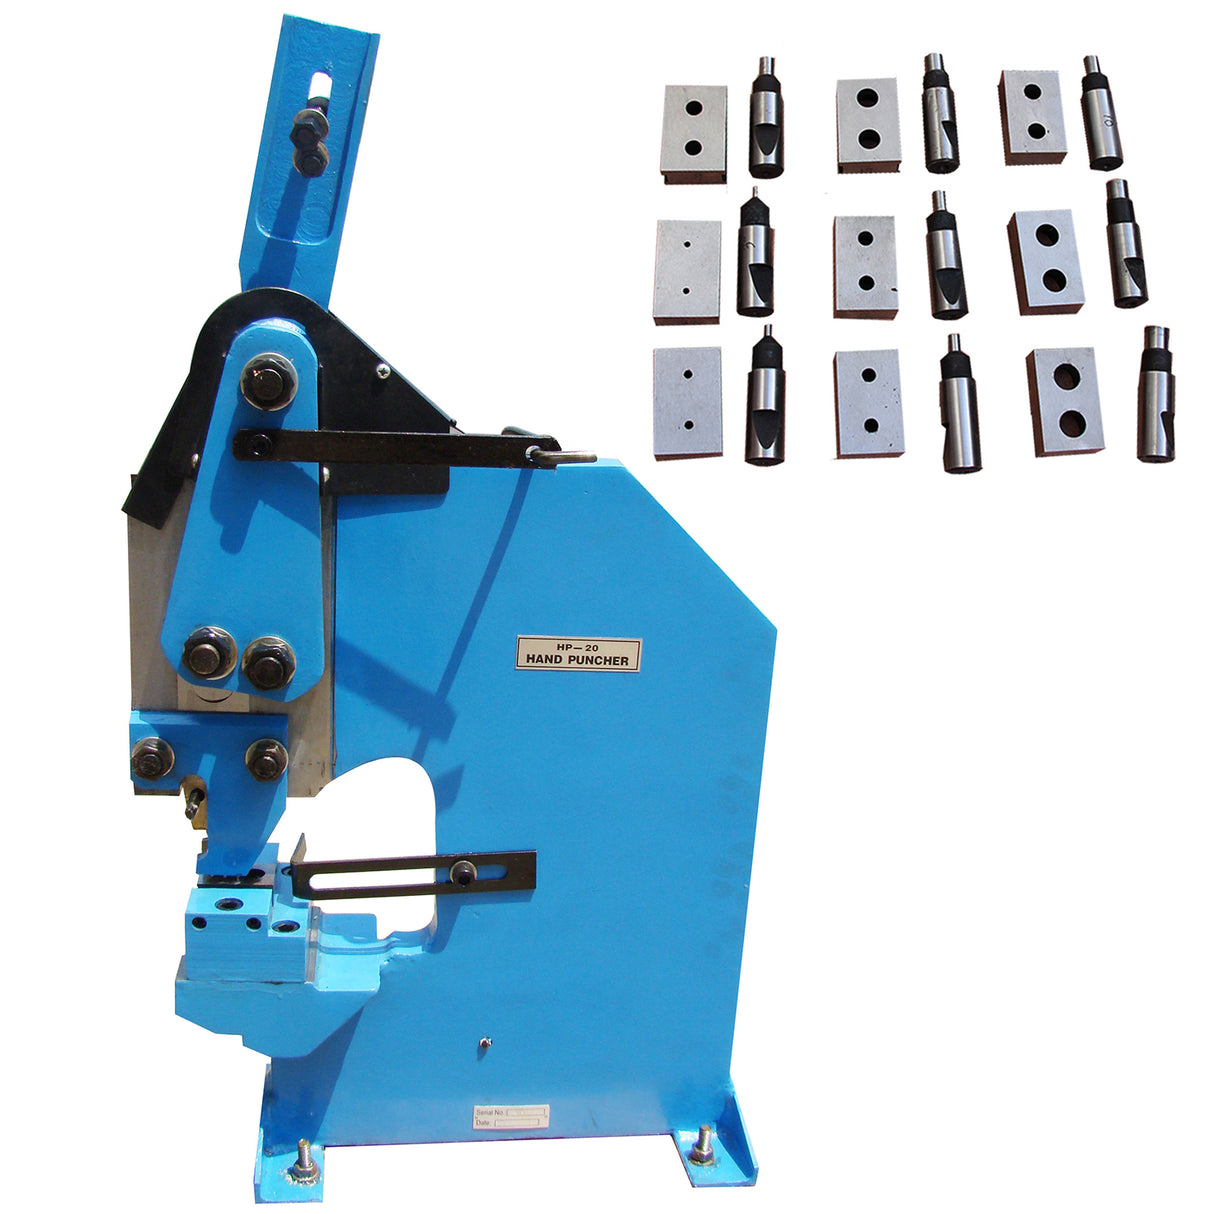 Kaka HP-20 Manual sheet metal punch,sheet metal punch machine,Comes standard with 9 sets of punches and dies